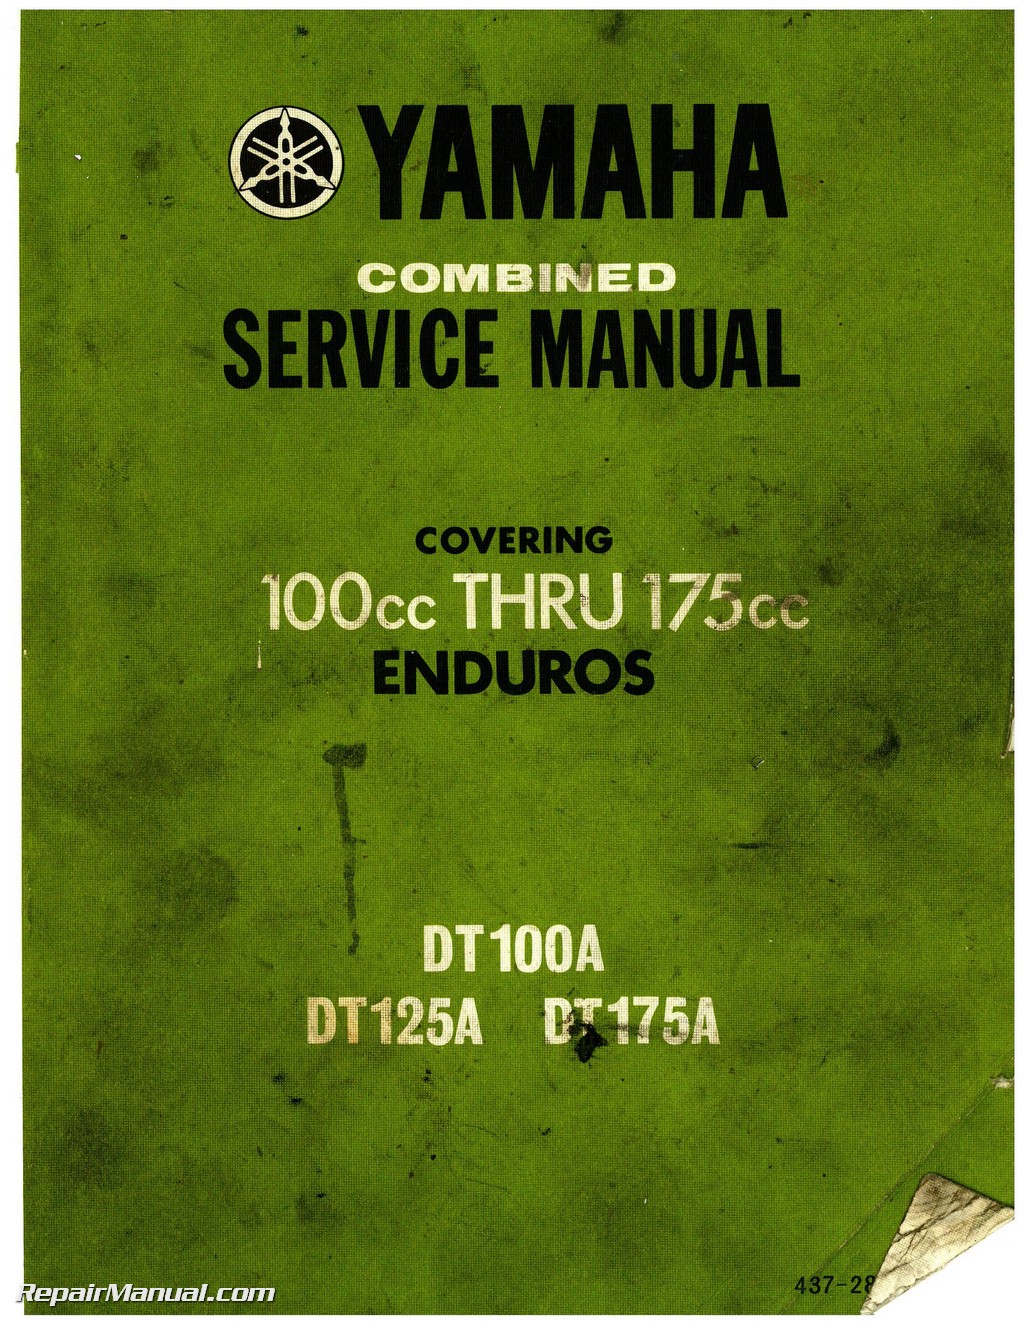 1974 yamaha dt175-a wiring diagram